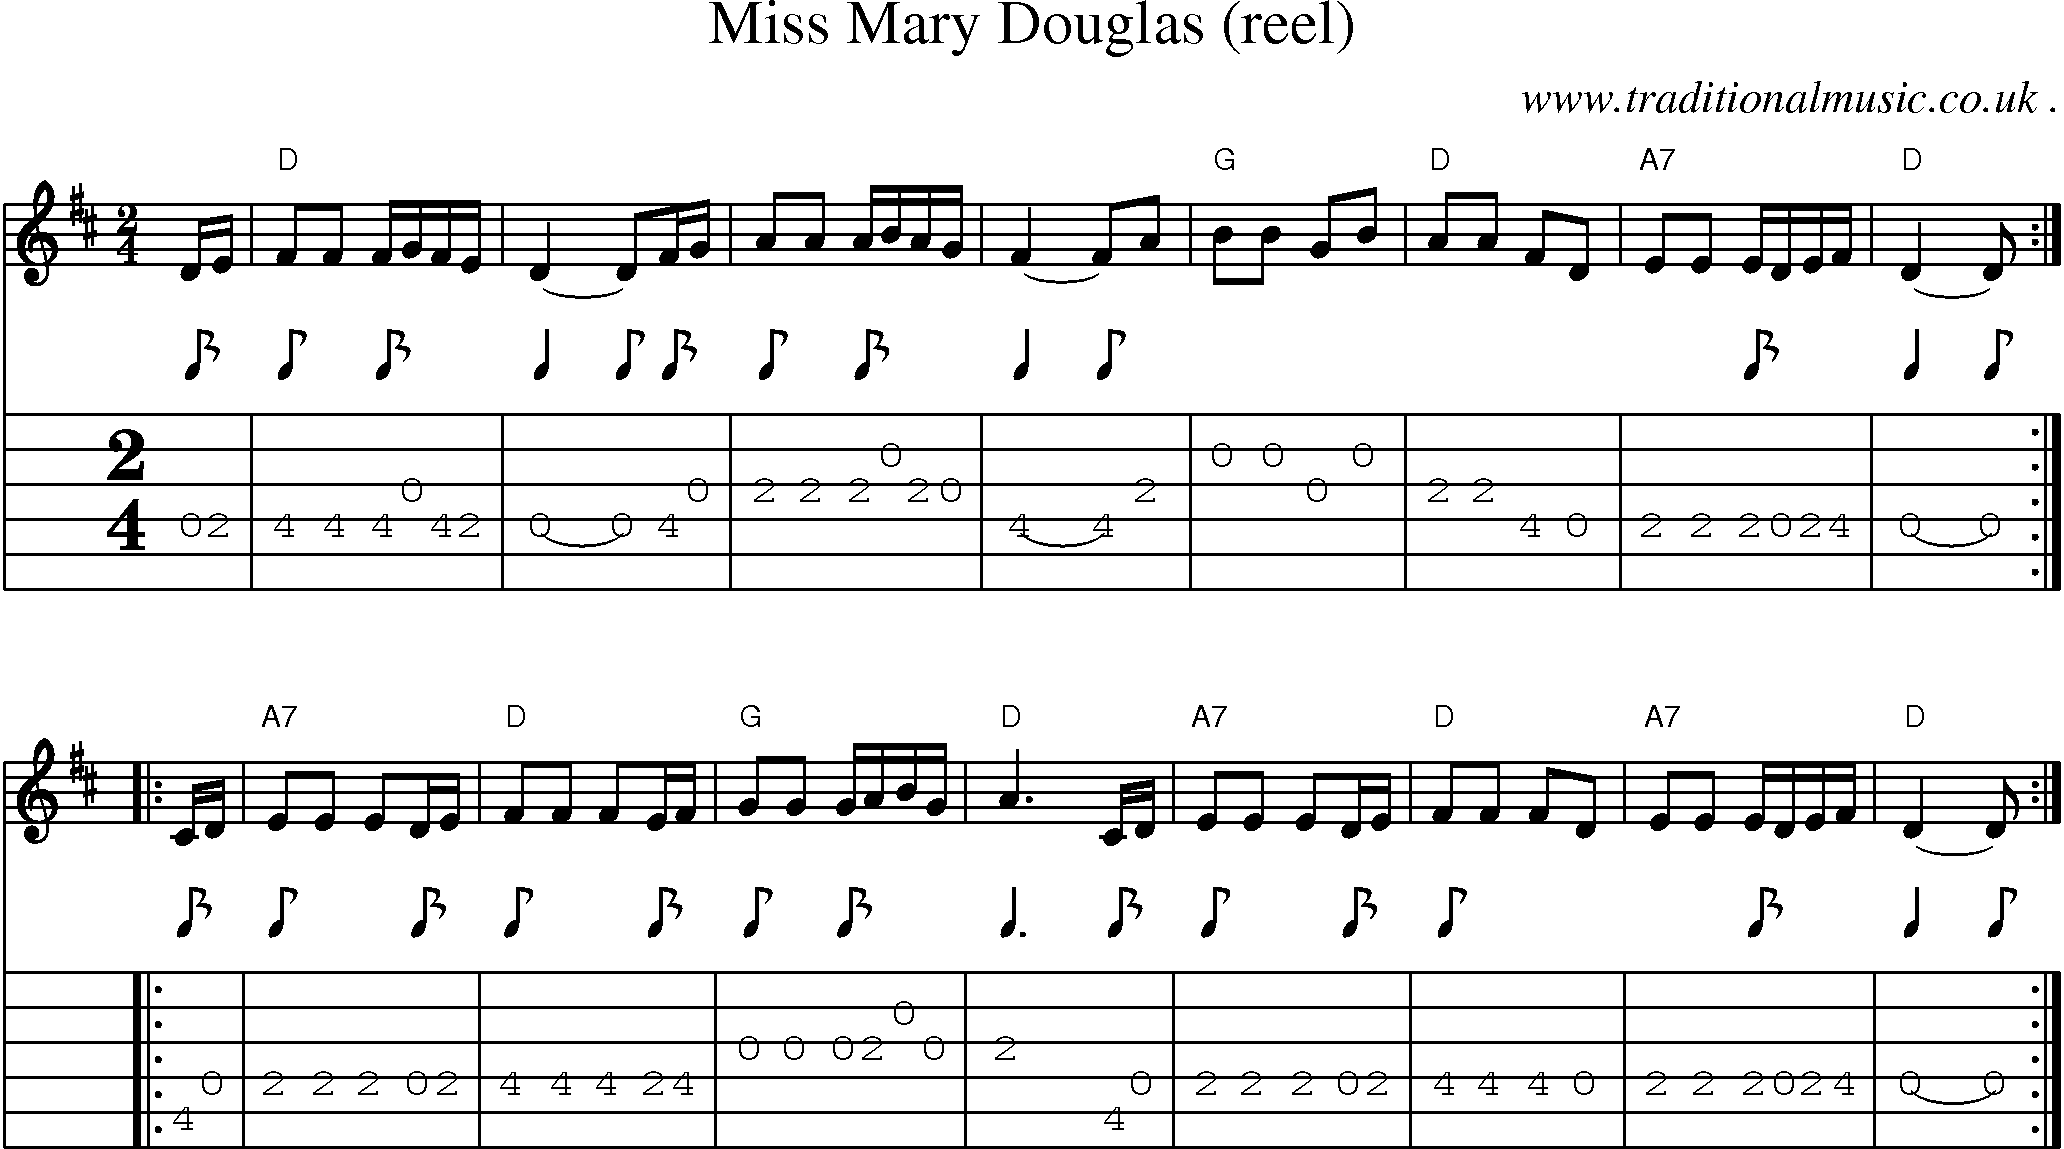 Sheet-music  score, Chords and Guitar Tabs for Miss Mary Douglas Reel